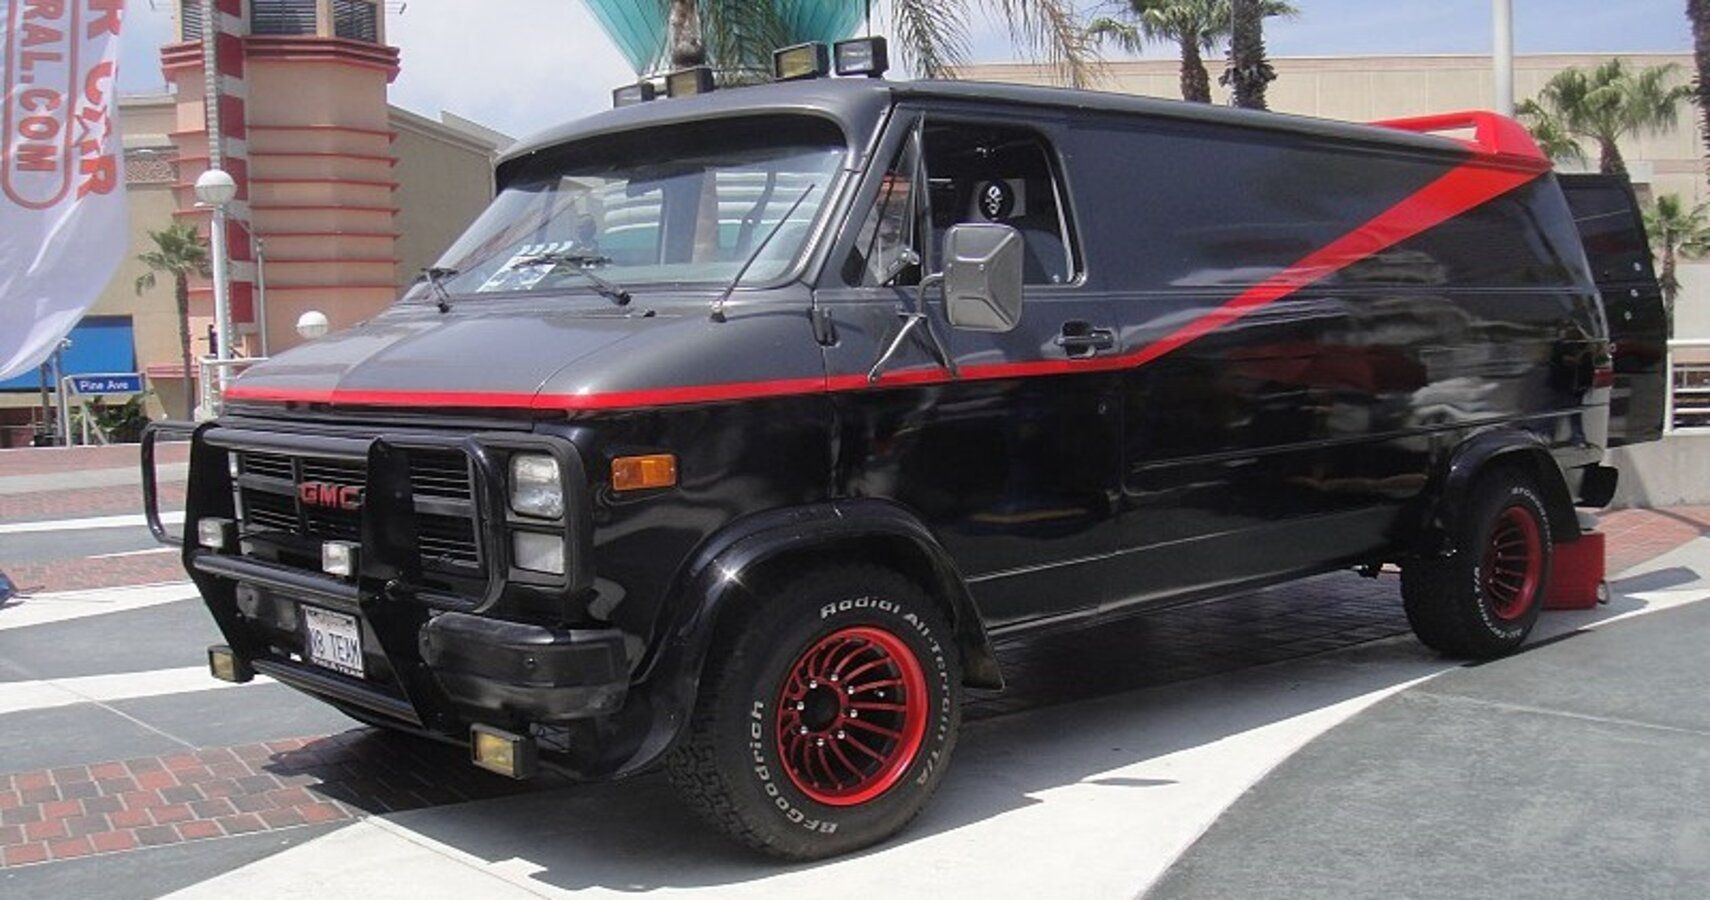 a-detailed-look-at-the-1983-gmc-van-from-the-a-team